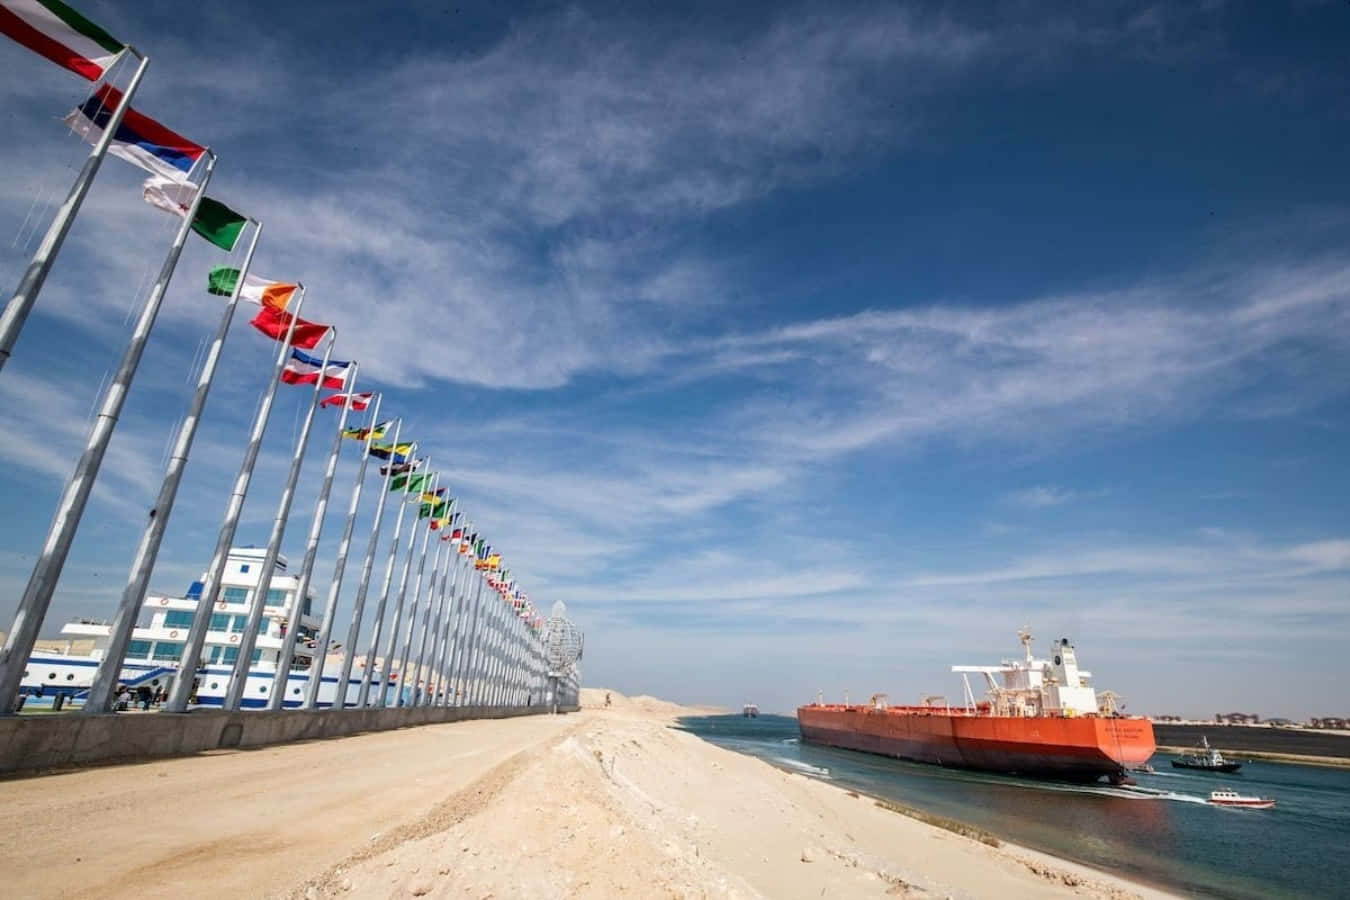 A Ship Is Docked Next To Flags On The Shore